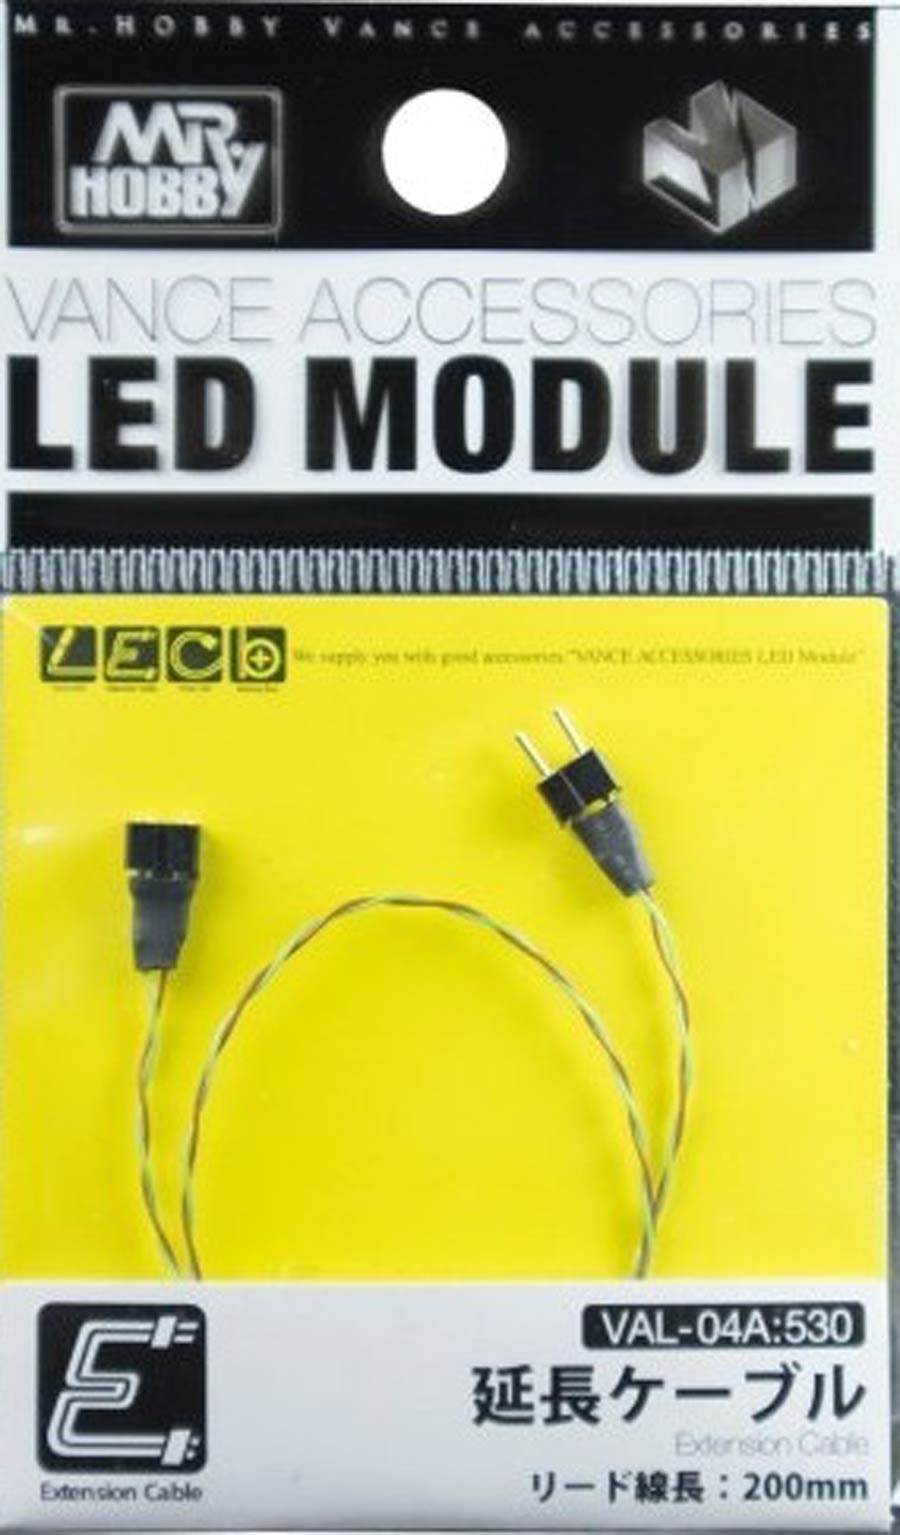 Mr. Hobby Vance Accessories LED Module - Extension Cable